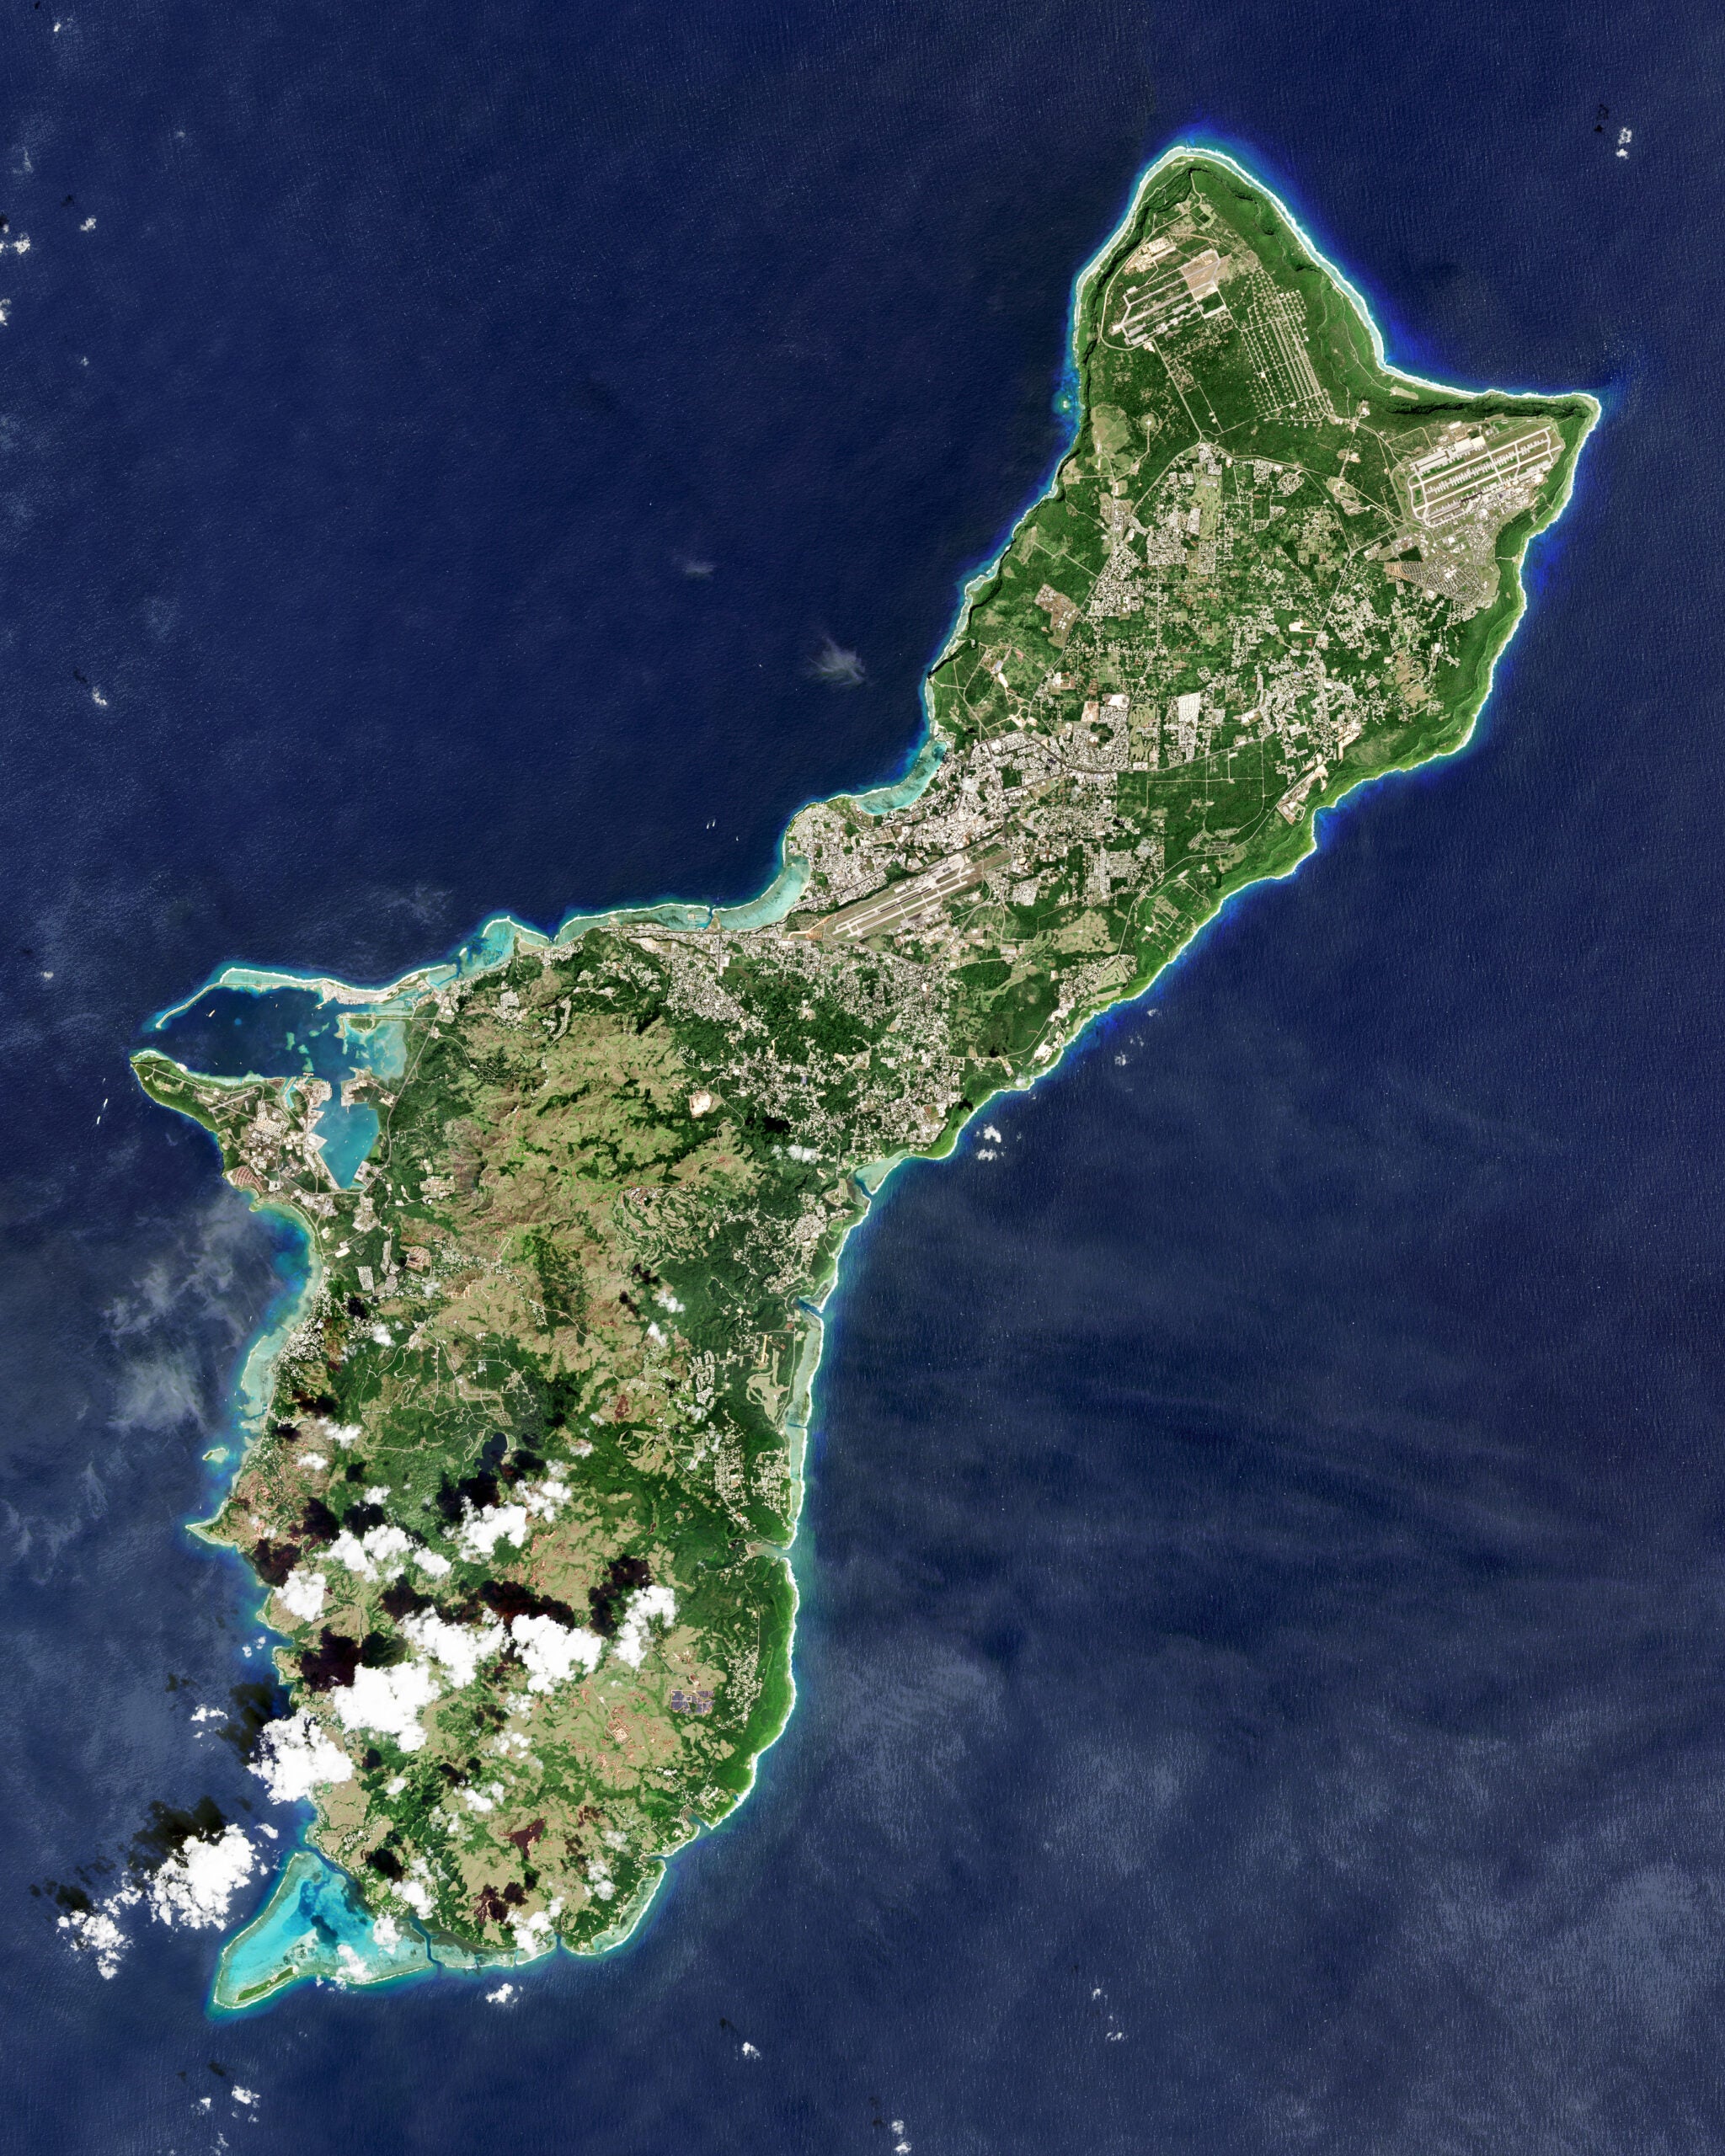 GUAM, UNITED STATES - FEBRUARY 2015: (SOUTH AFRICA OUT): The Island of Guam, located in the North Pacific Ocean and an unincorporated United States territory on February 10, 2015 in Guam, United States. (Photo by USGS/NASA Landsat data/Orbital Horizon Gallo Images/Getty Images)